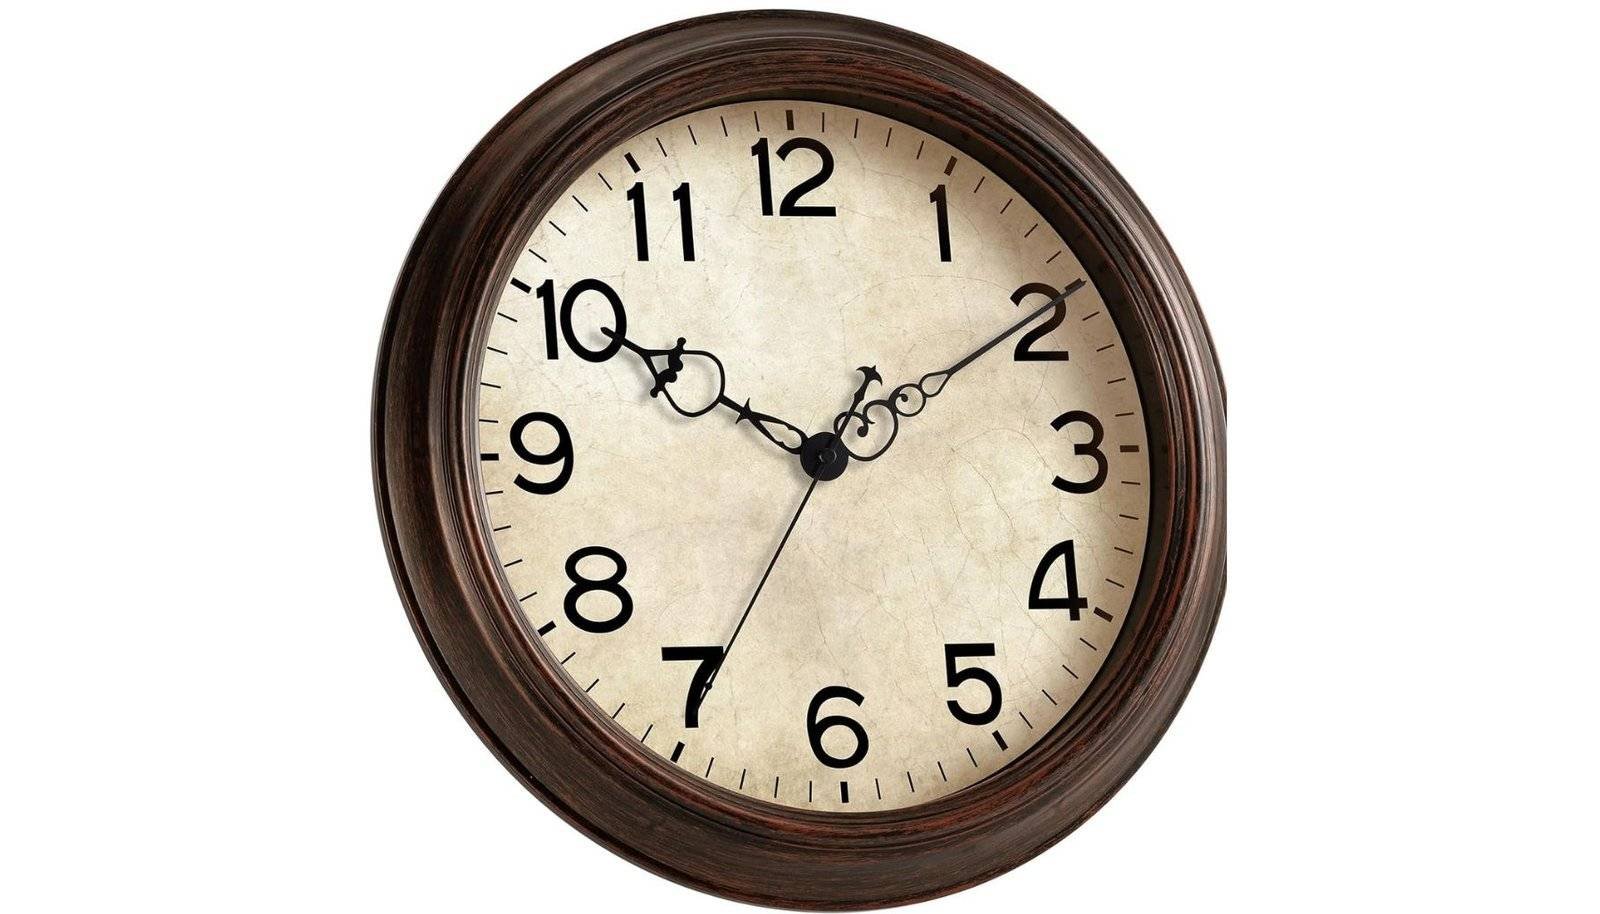 KECYET 14 Inch Vintage Retro Rustic Style Decorative Kitchen Room Wall Clock Review